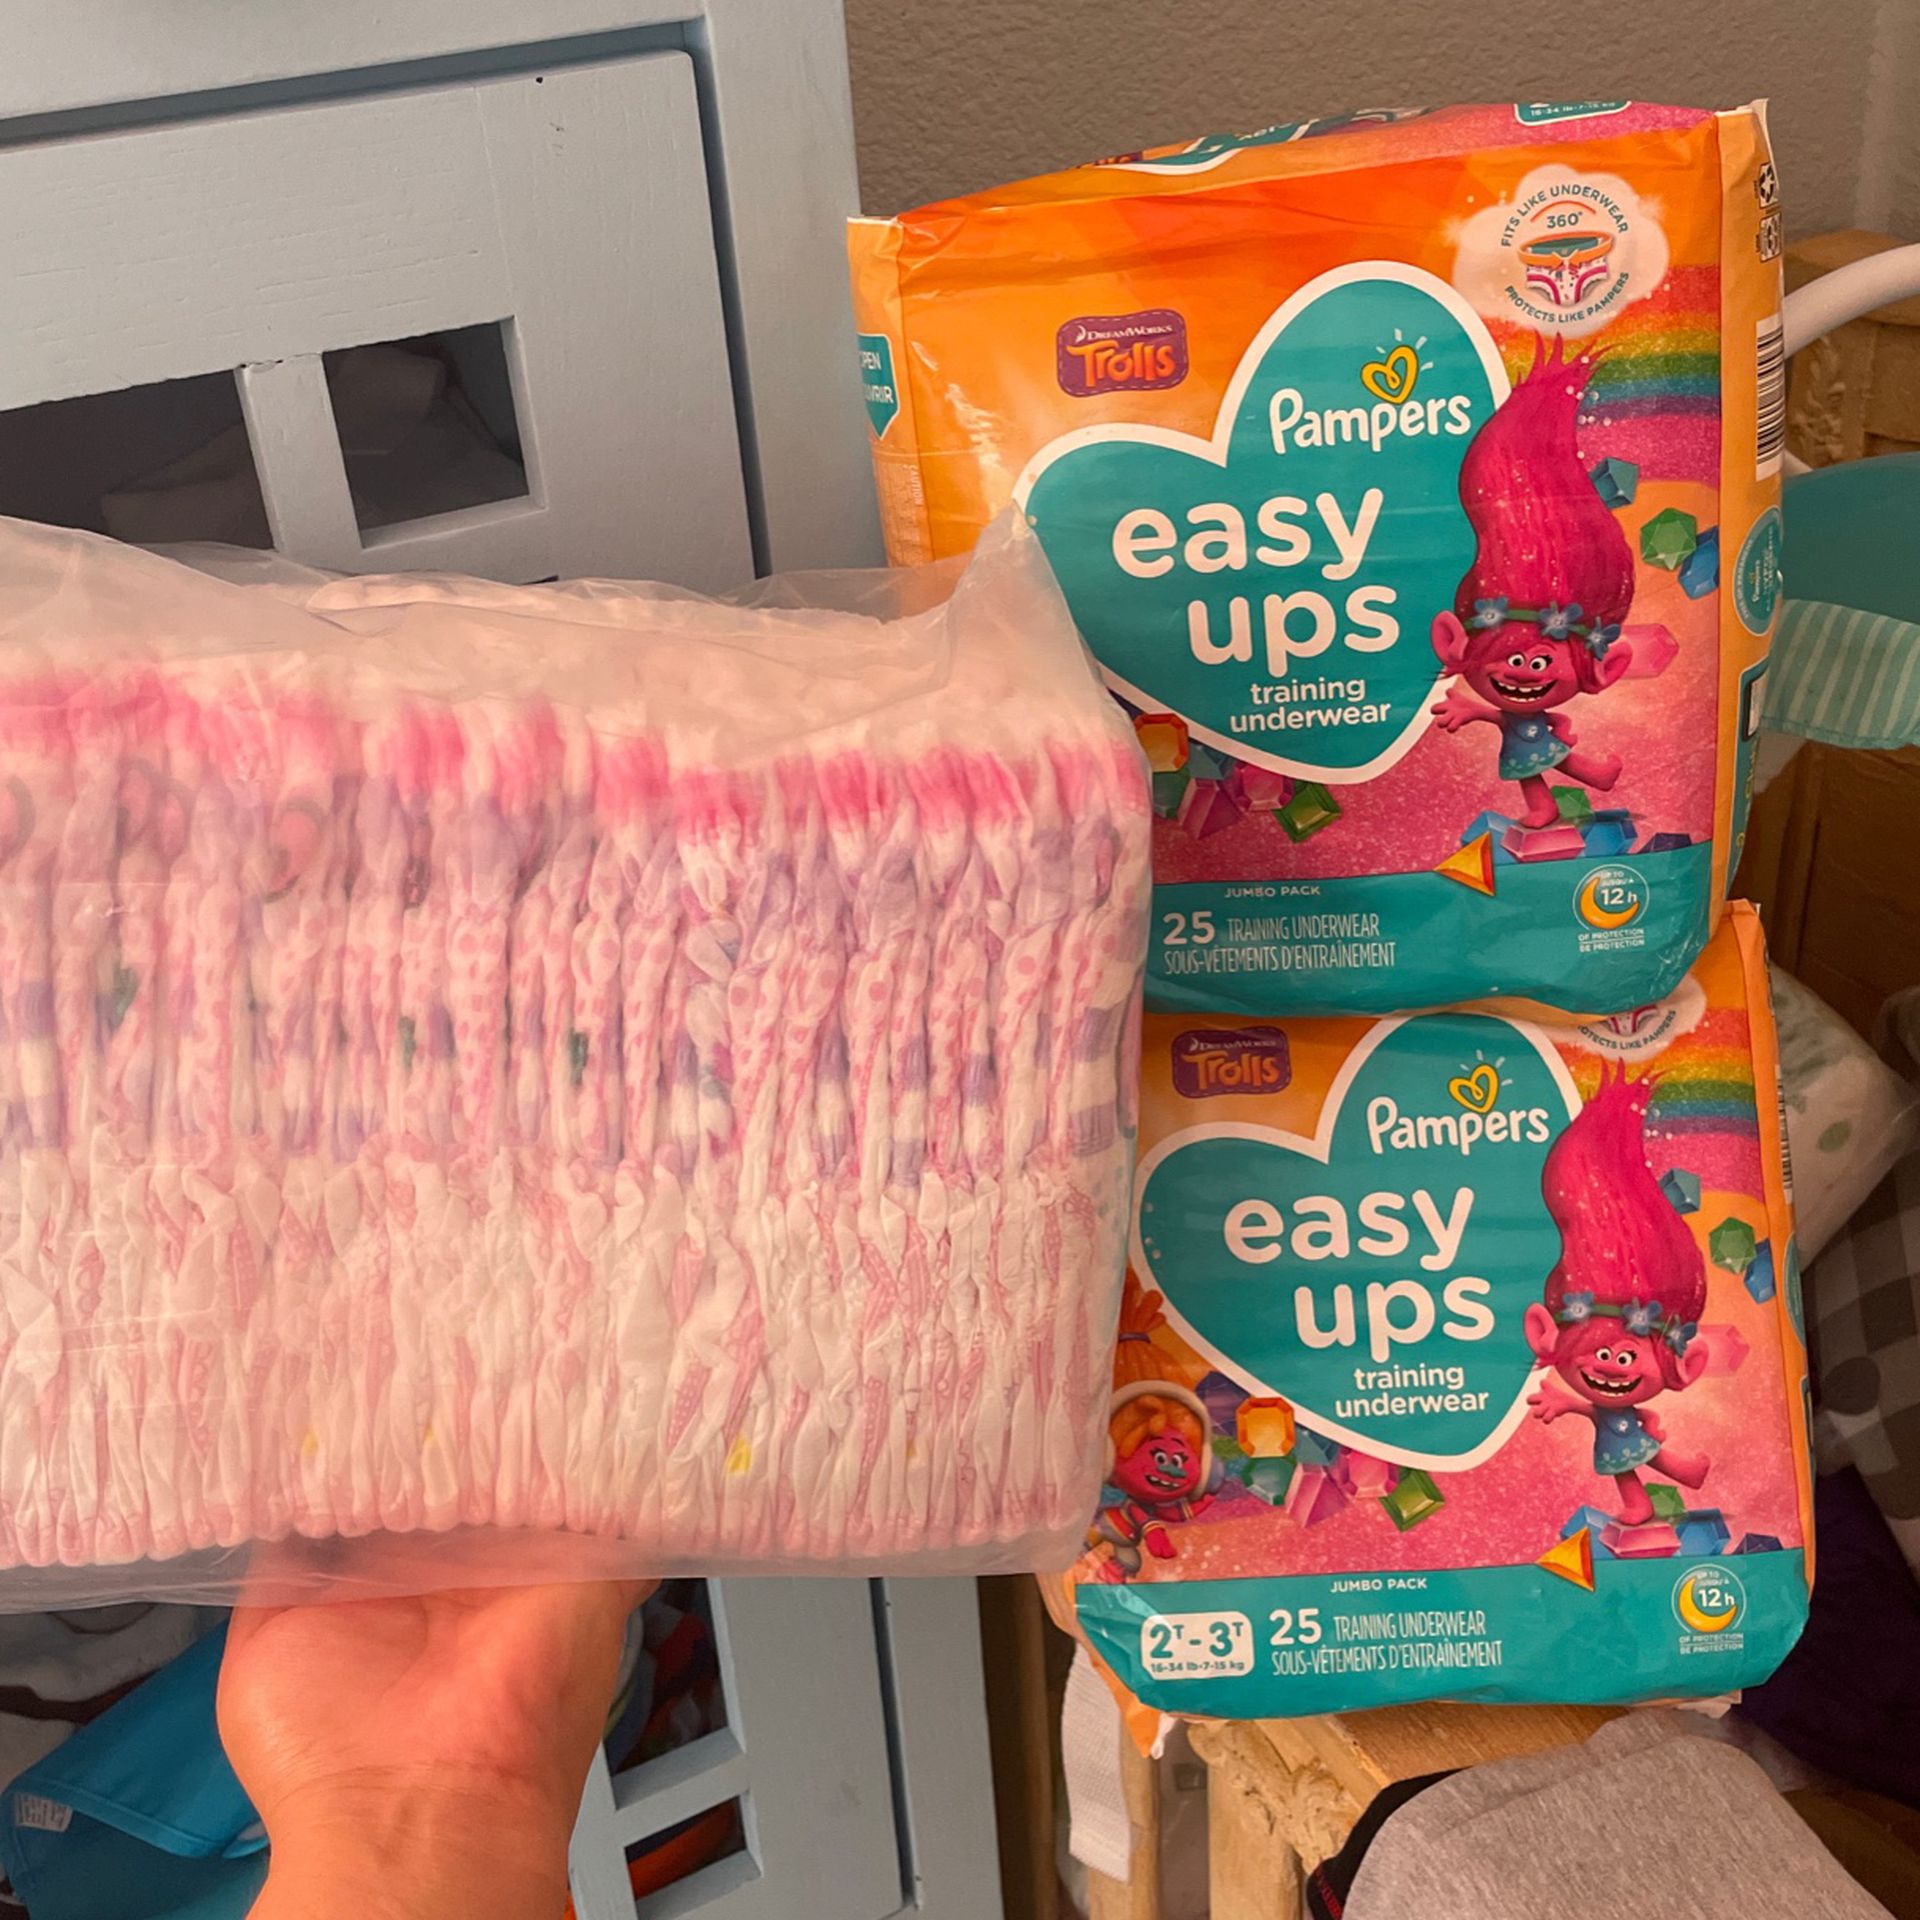 Easy Ups 87 Count Size 2T-3T